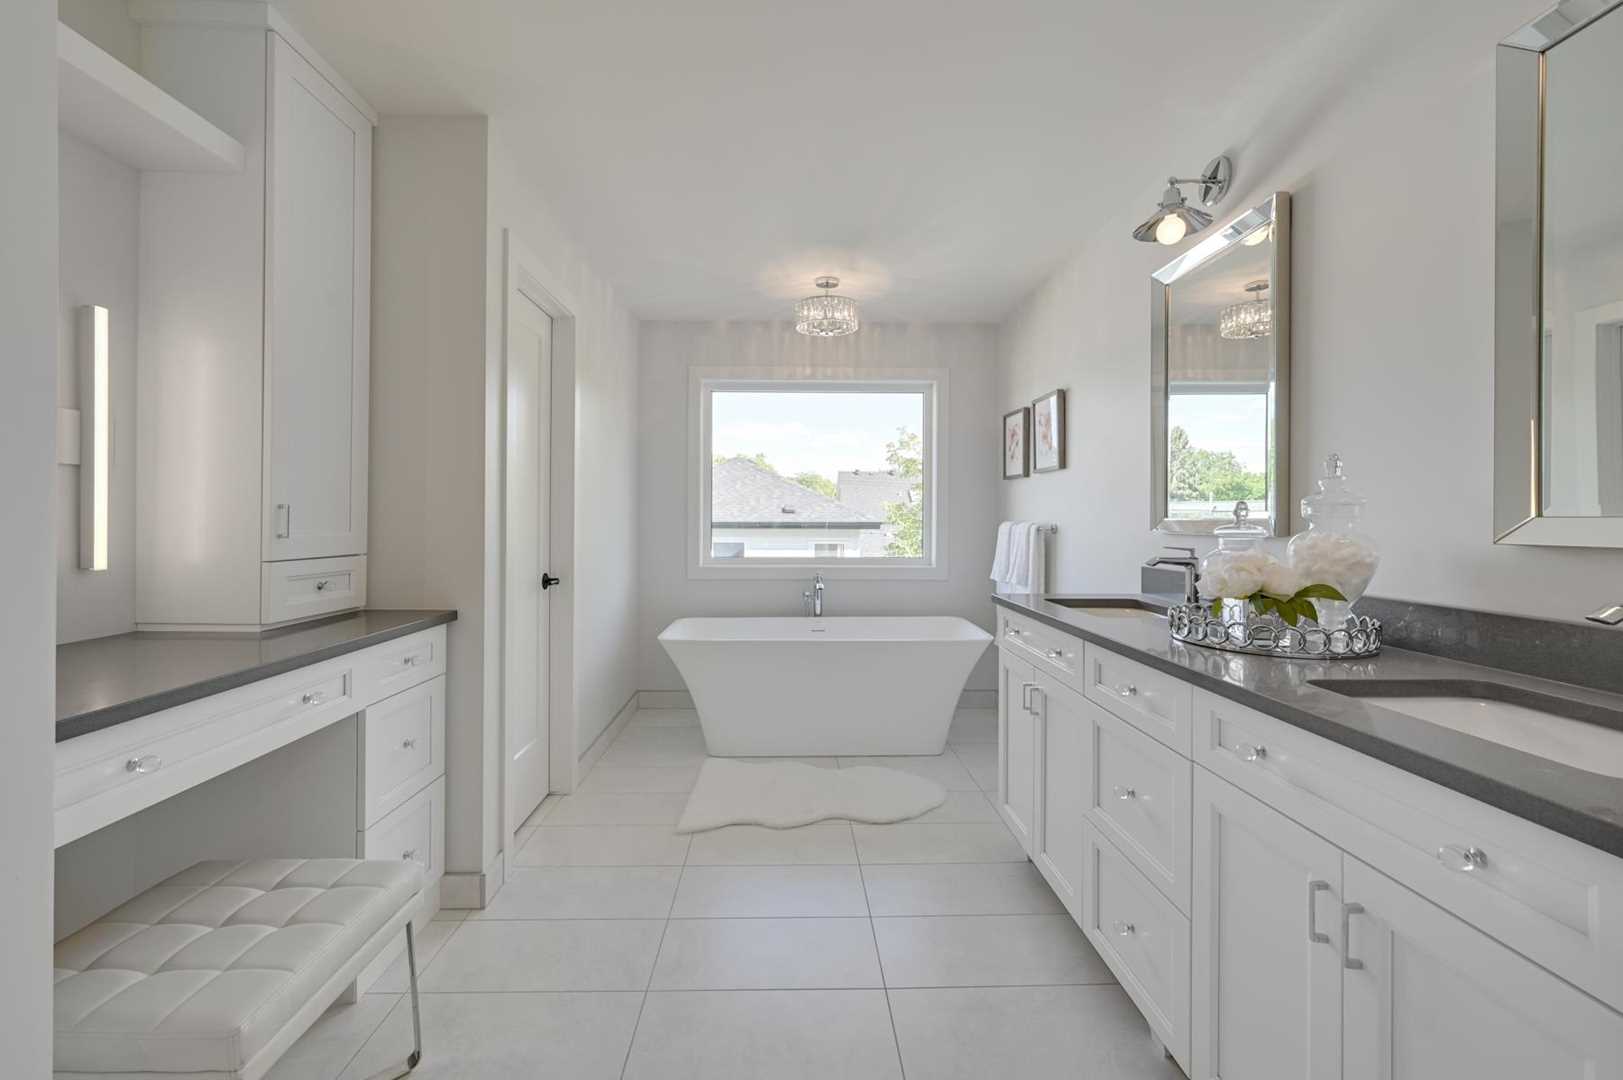 En suite bathroom, white ceiling cupboards and walls; soaker tub in front of window; makeup table and vanity mirror to left